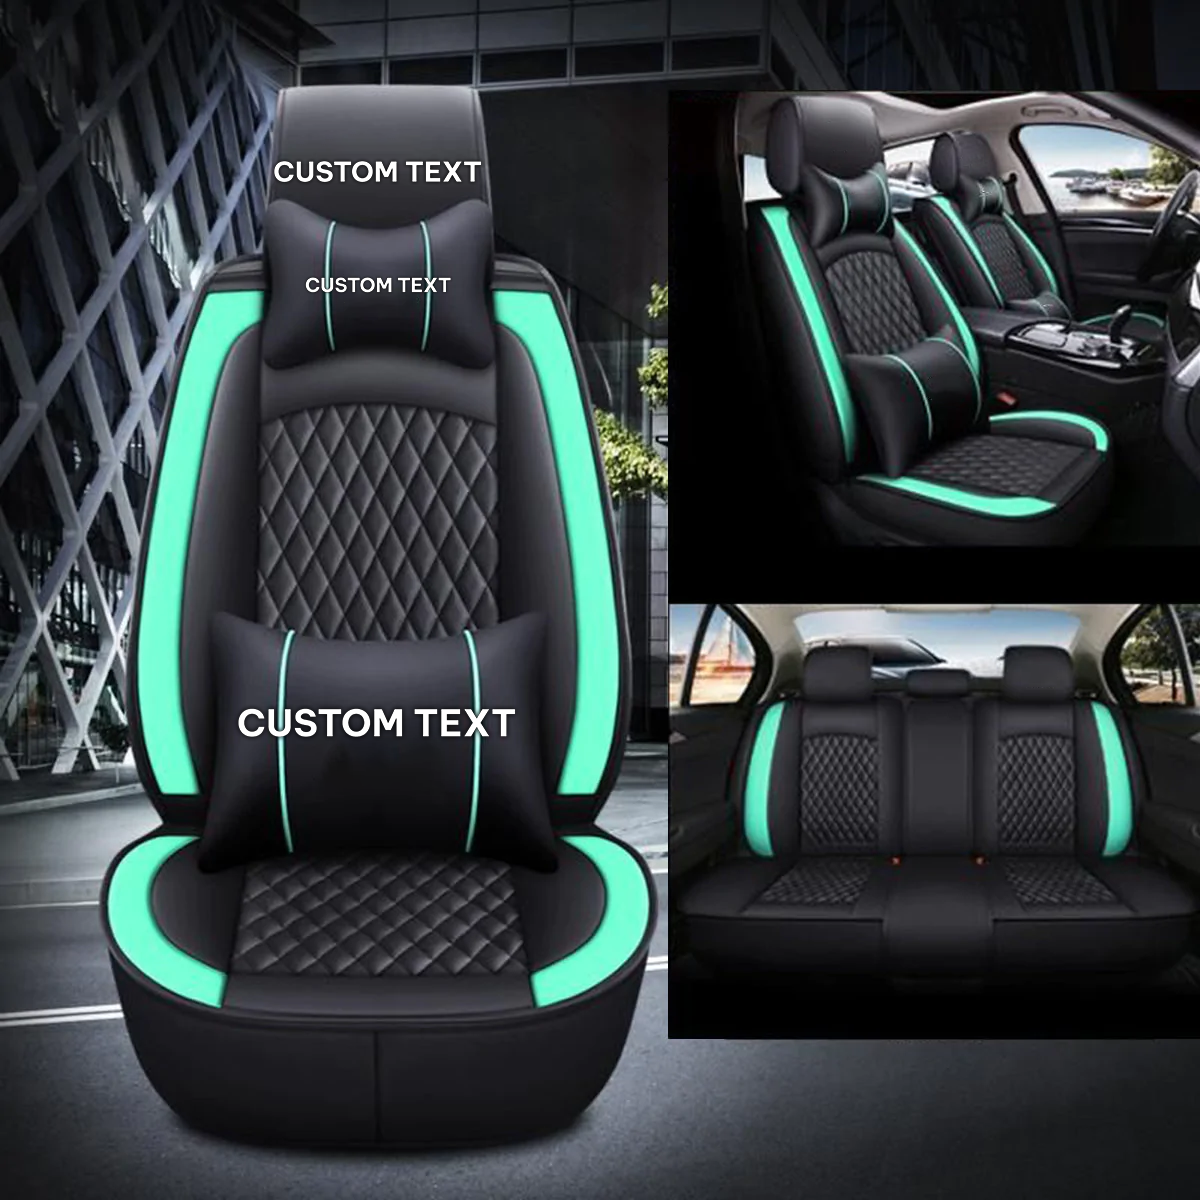 Custom Text For Seat Covers 5 Seats Full Set, Custom Fit For Your Cars, Leatherette Automotive Seat Cushion Protector Universal Fit, Vehicle Auto Interior Decor LM13988